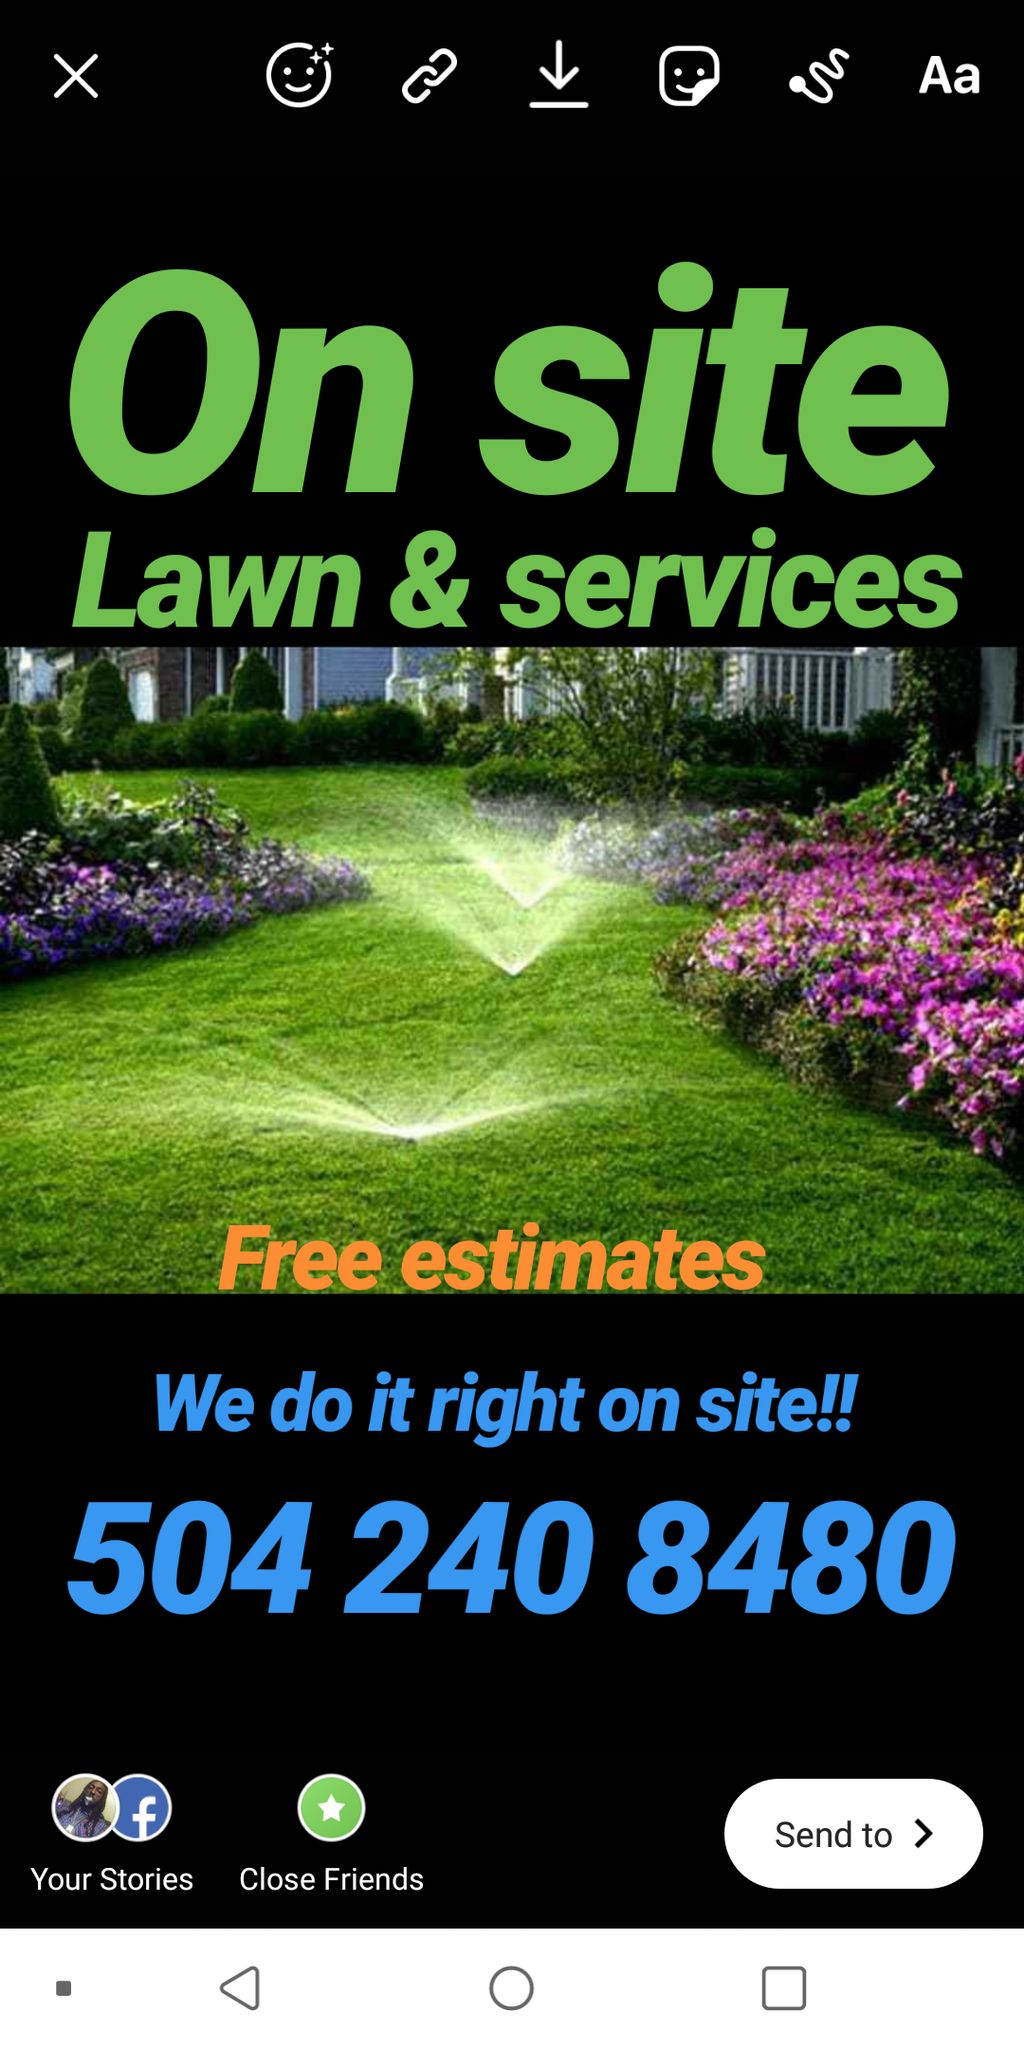 Onsite504 lawn care